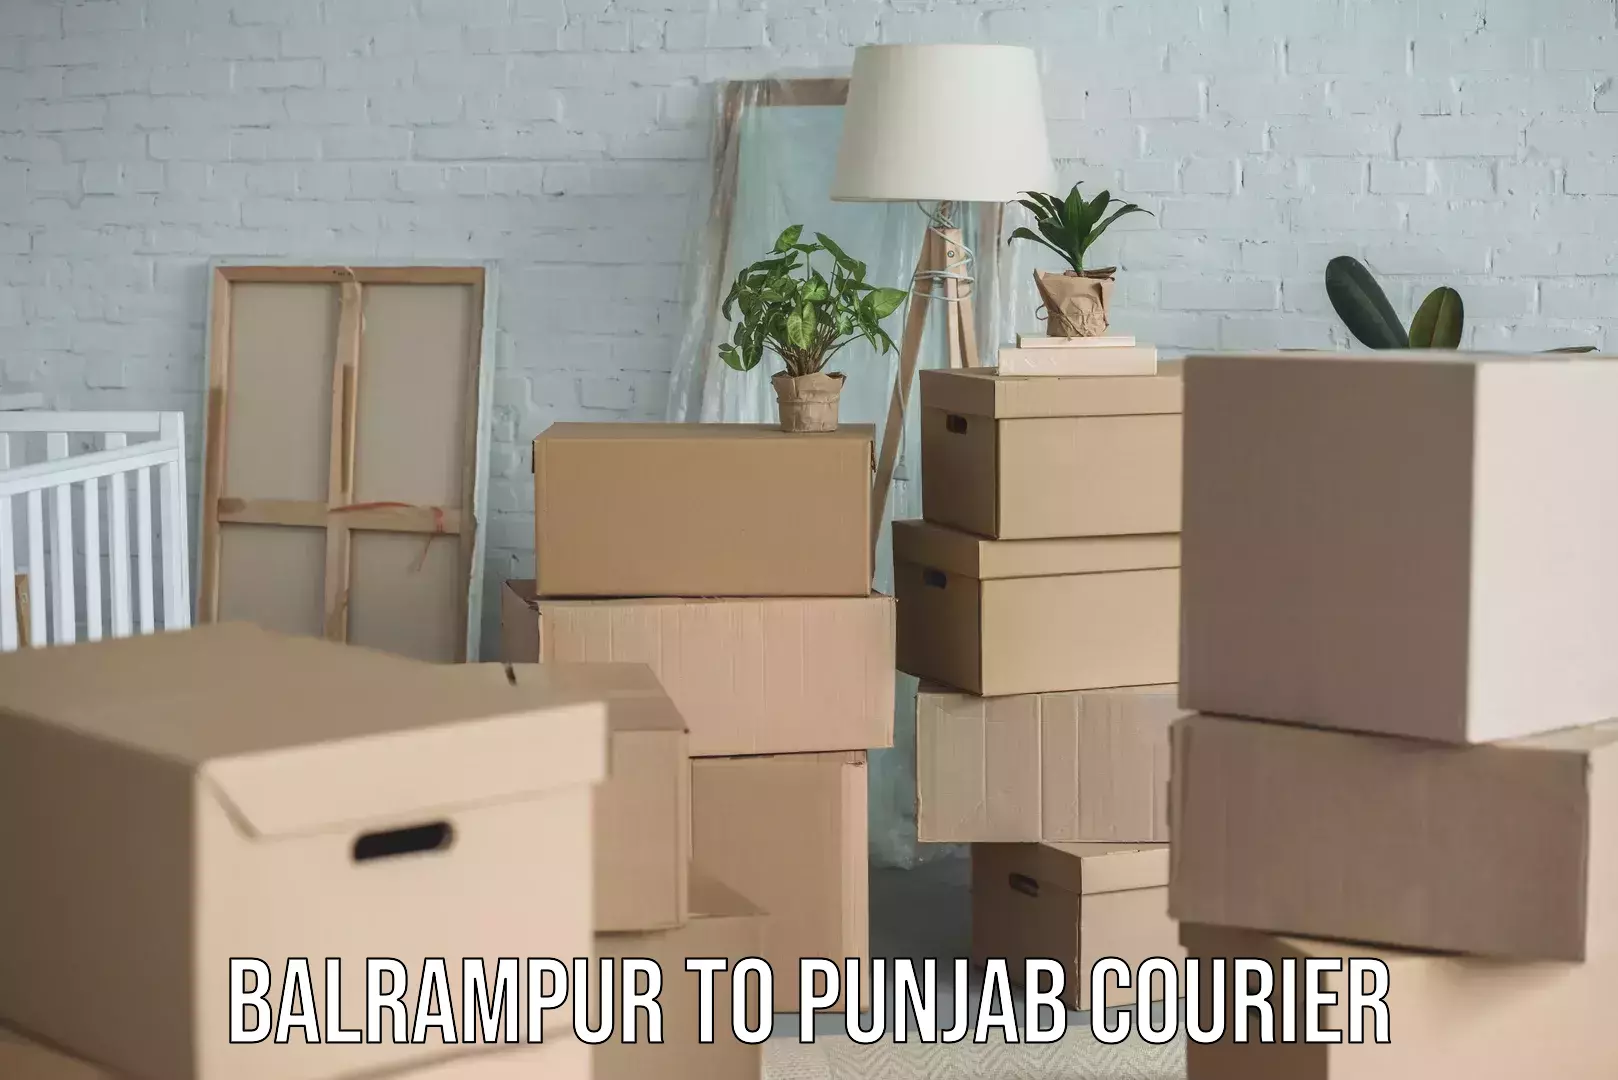 Reliable delivery network Balrampur to Punjab